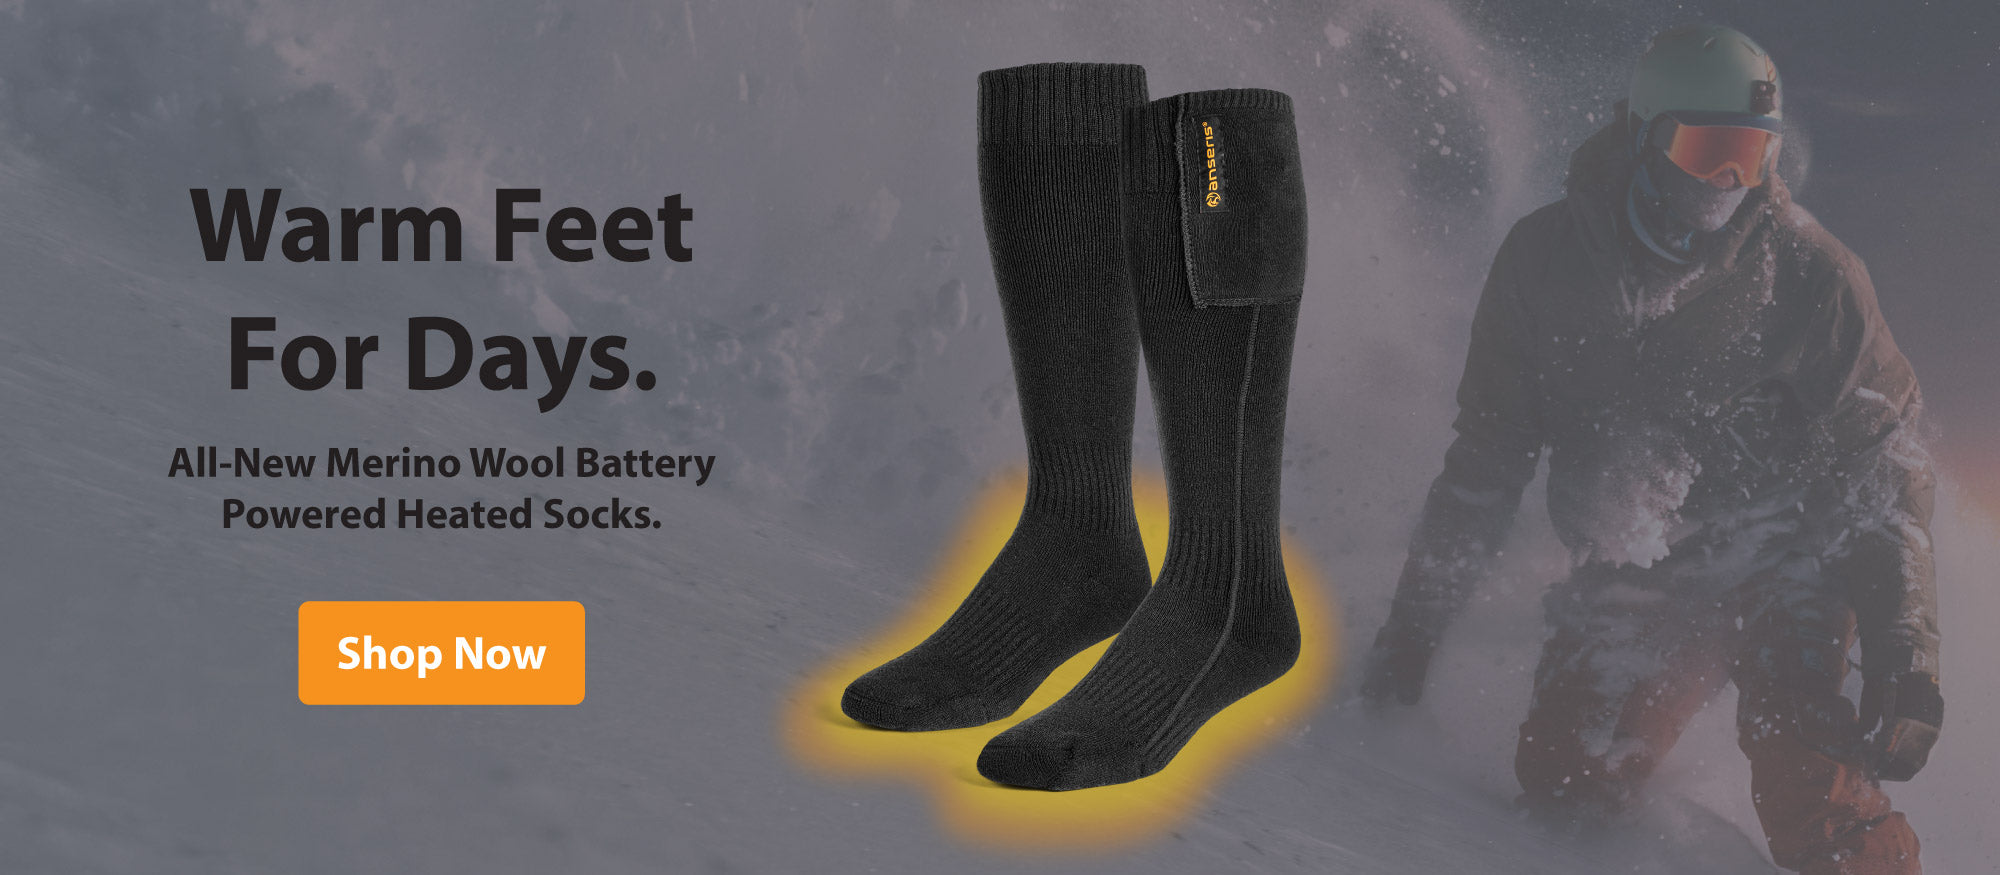 shop the all new anseris merino wool heated socks featuring rechargeable batteries and a remote control for the ultimate electric foot warmer for any outdoor activity, skiing, snowboarding, hiking, running or walking